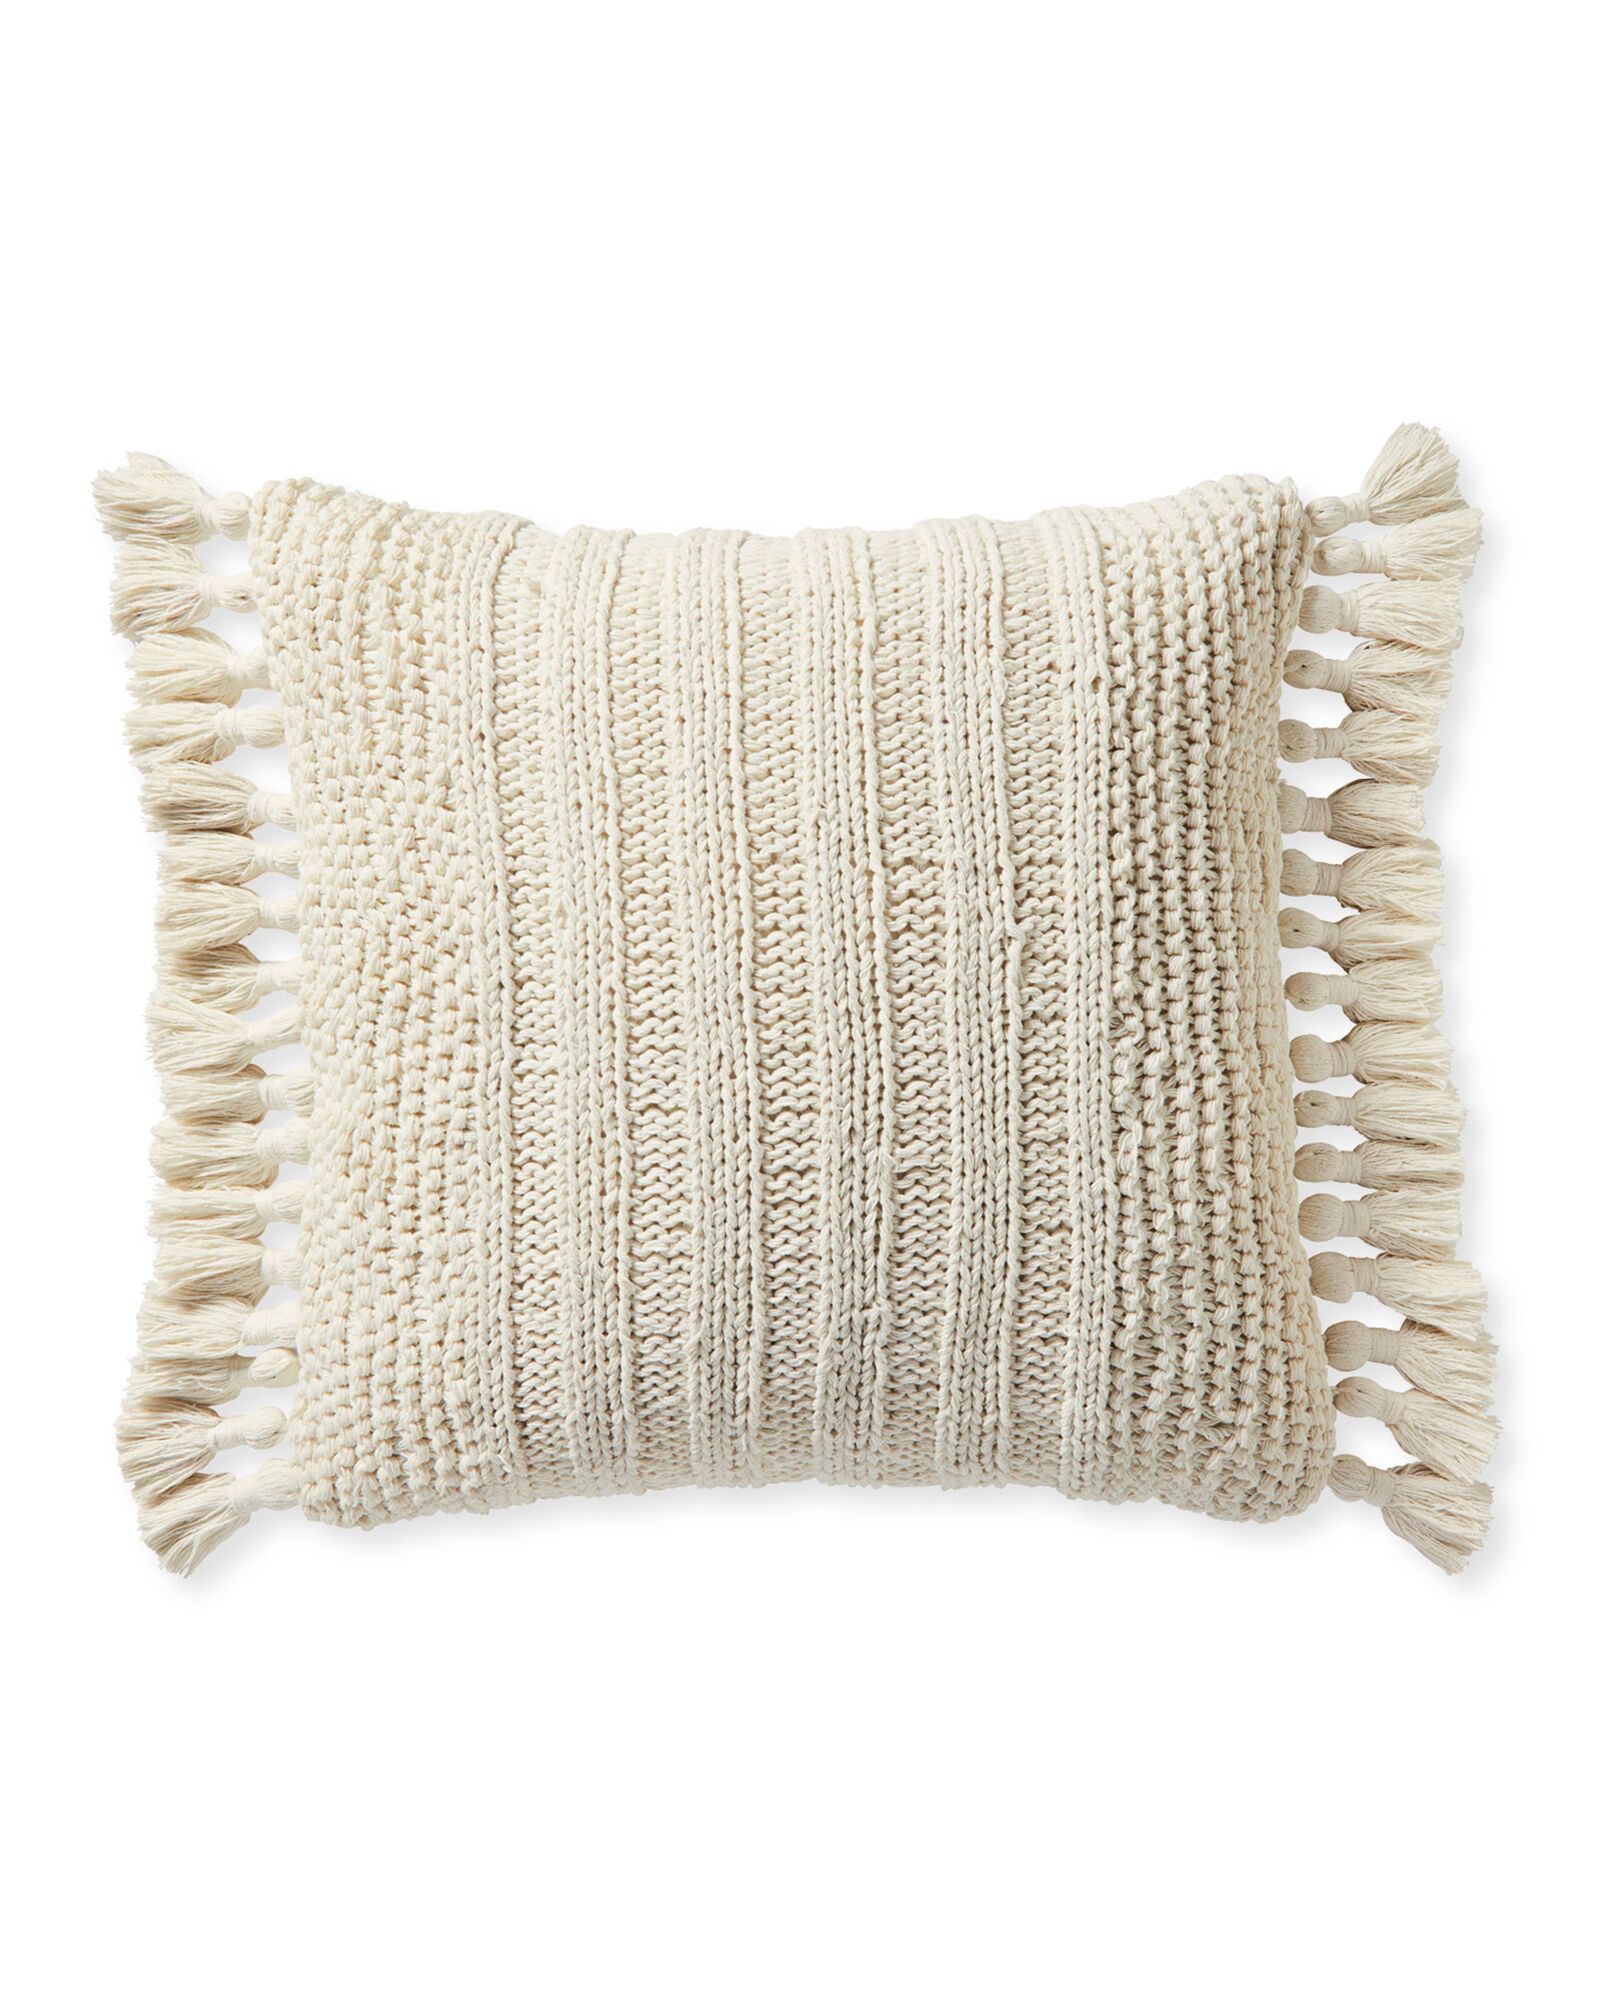 Sequoia Pillow Cover | Serena and Lily